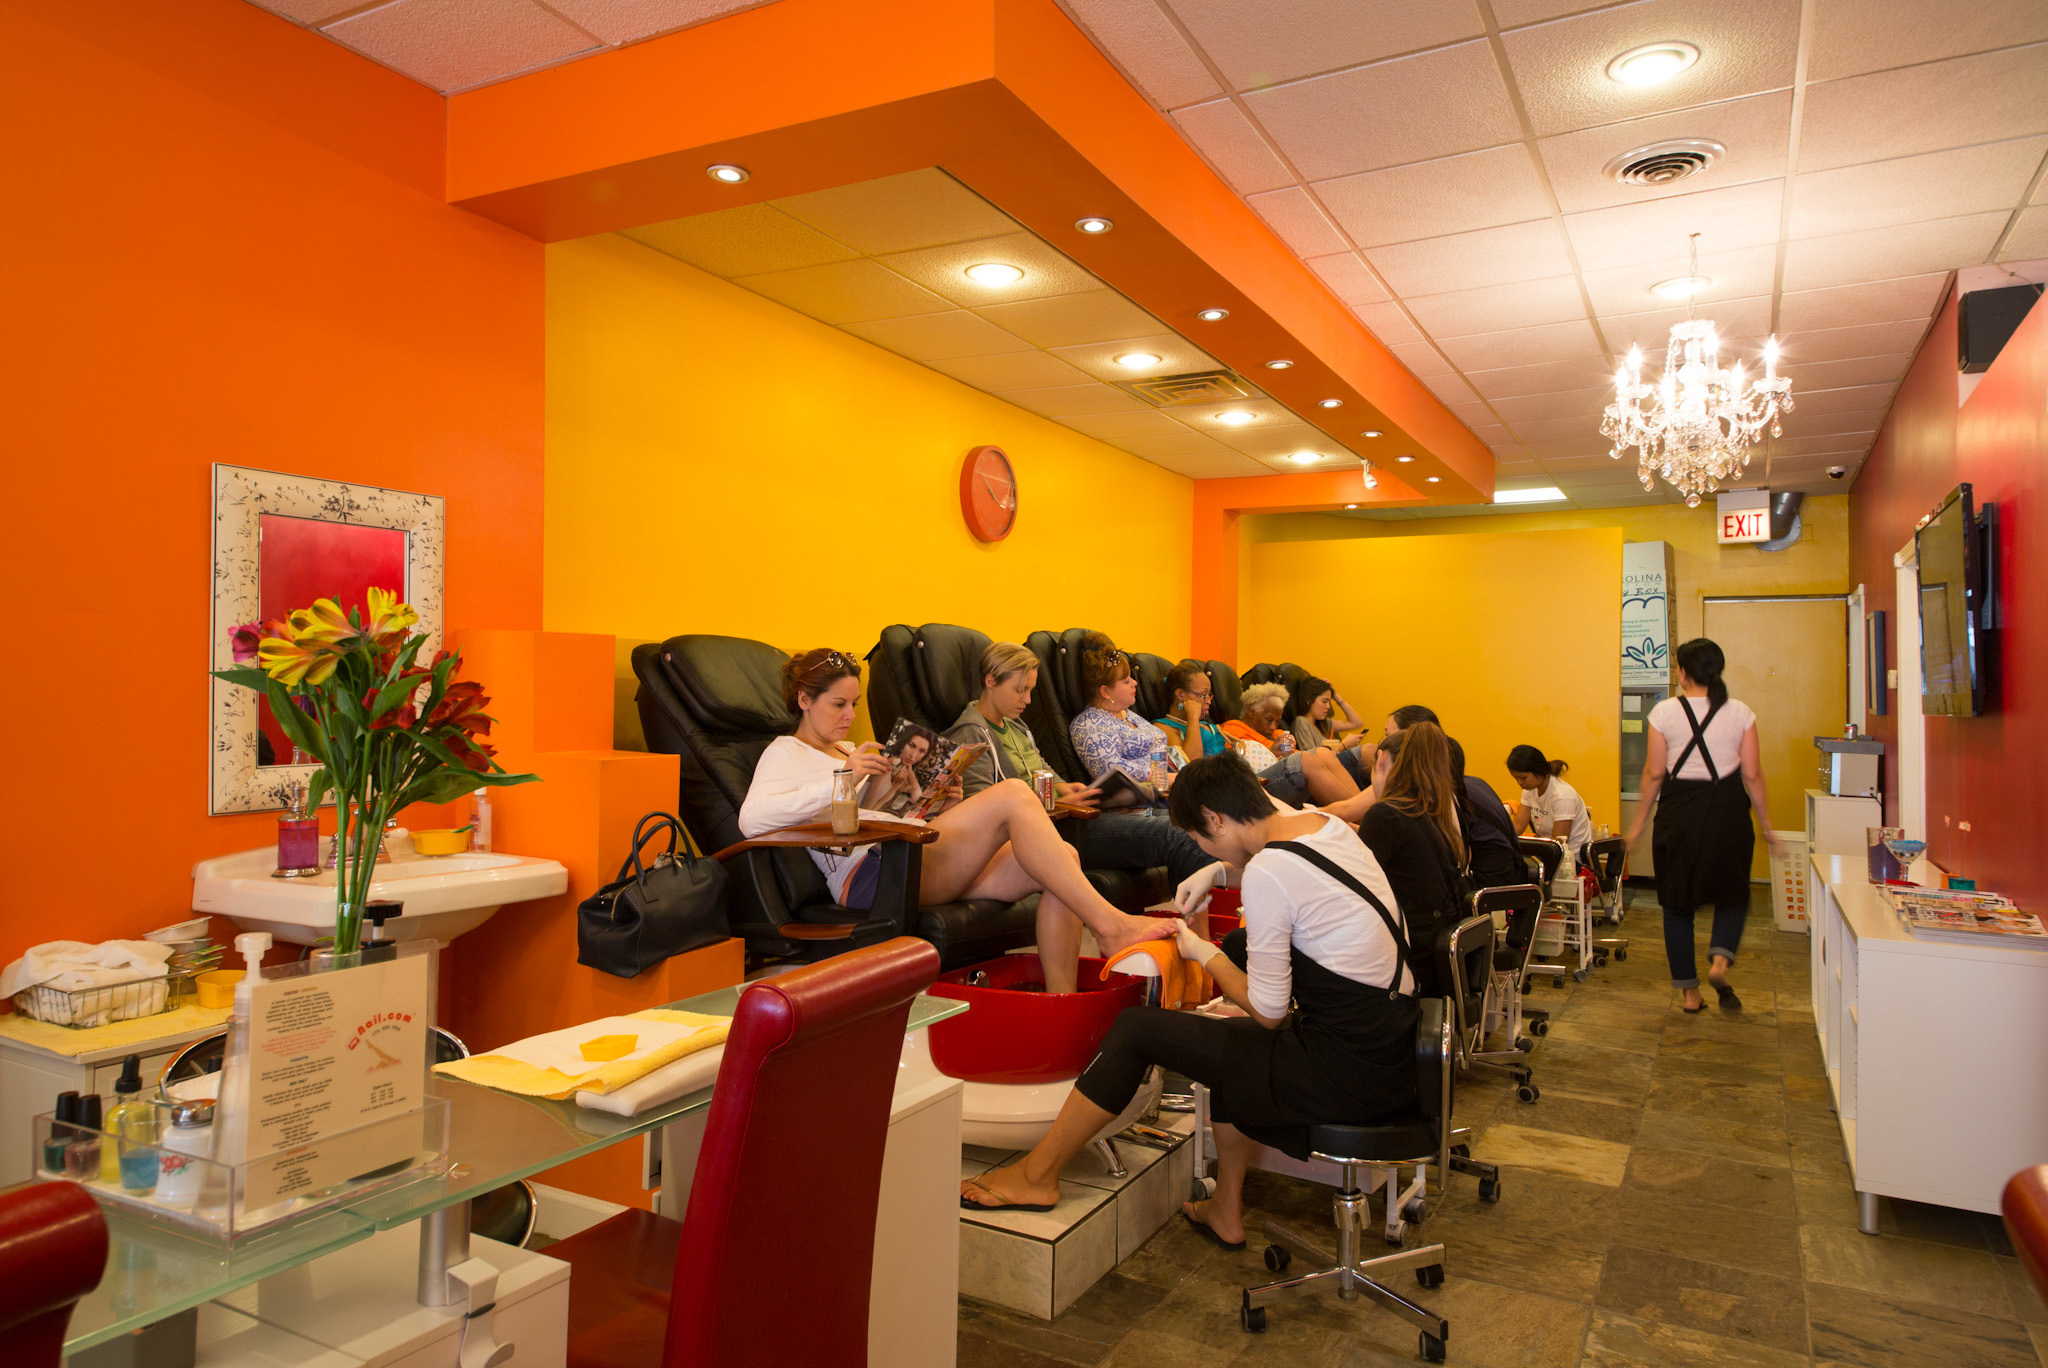 Nail salons in Chicago for mani pedis and nail art